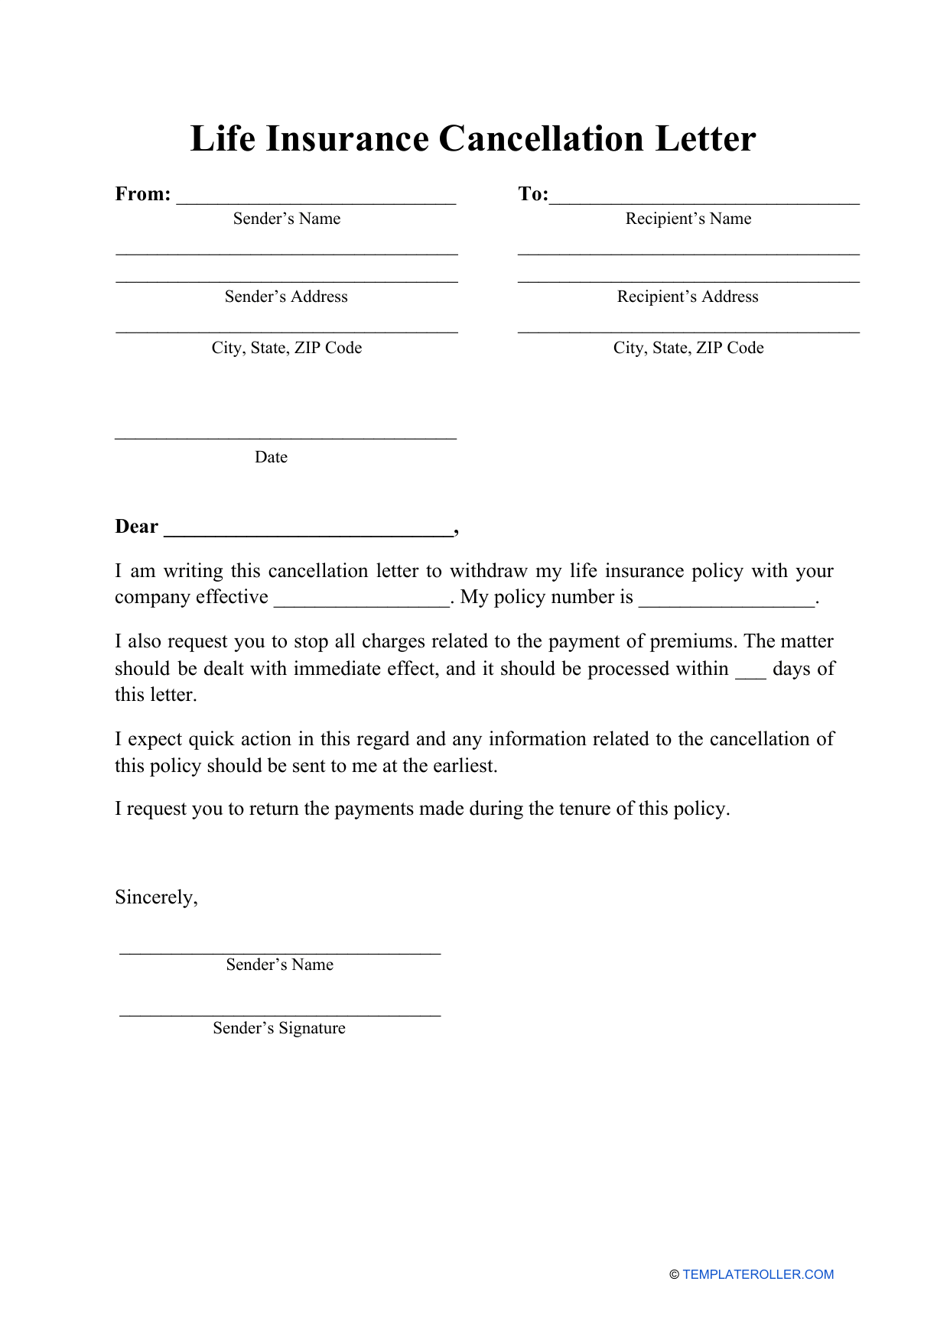 Life Insurance Cancellation Letter Template - Preview Image